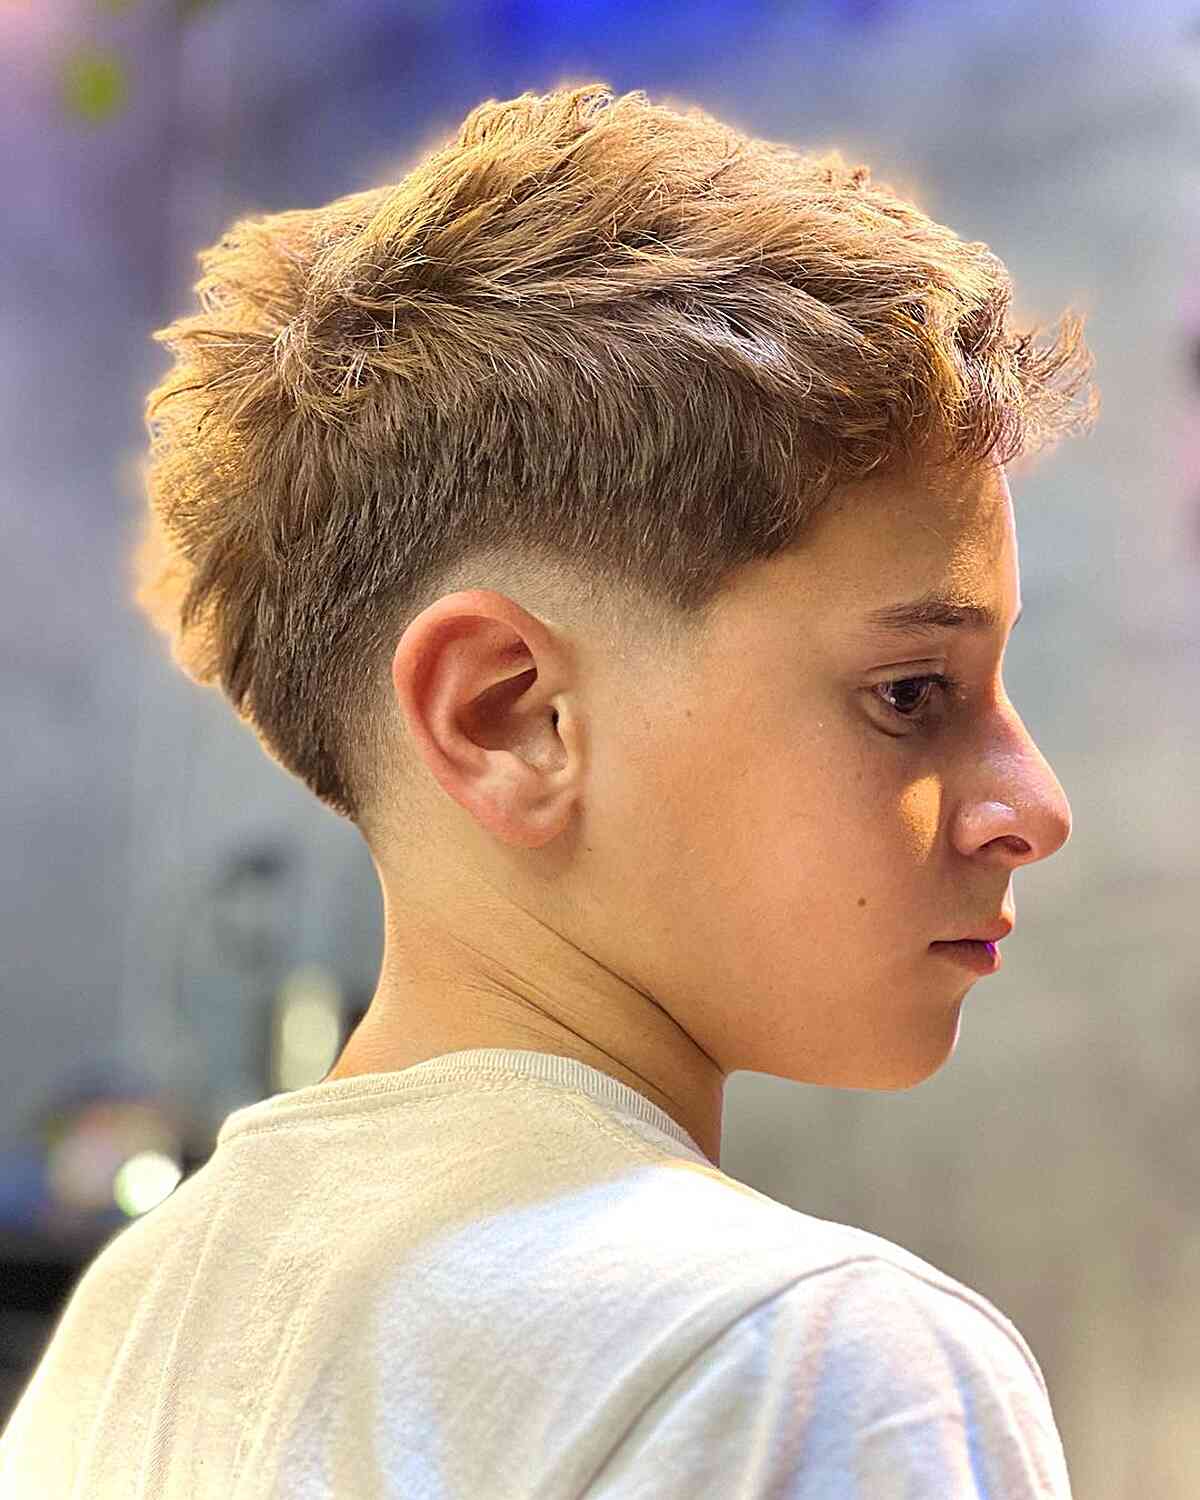 74 Coolest Boys Haircuts for School in 2023